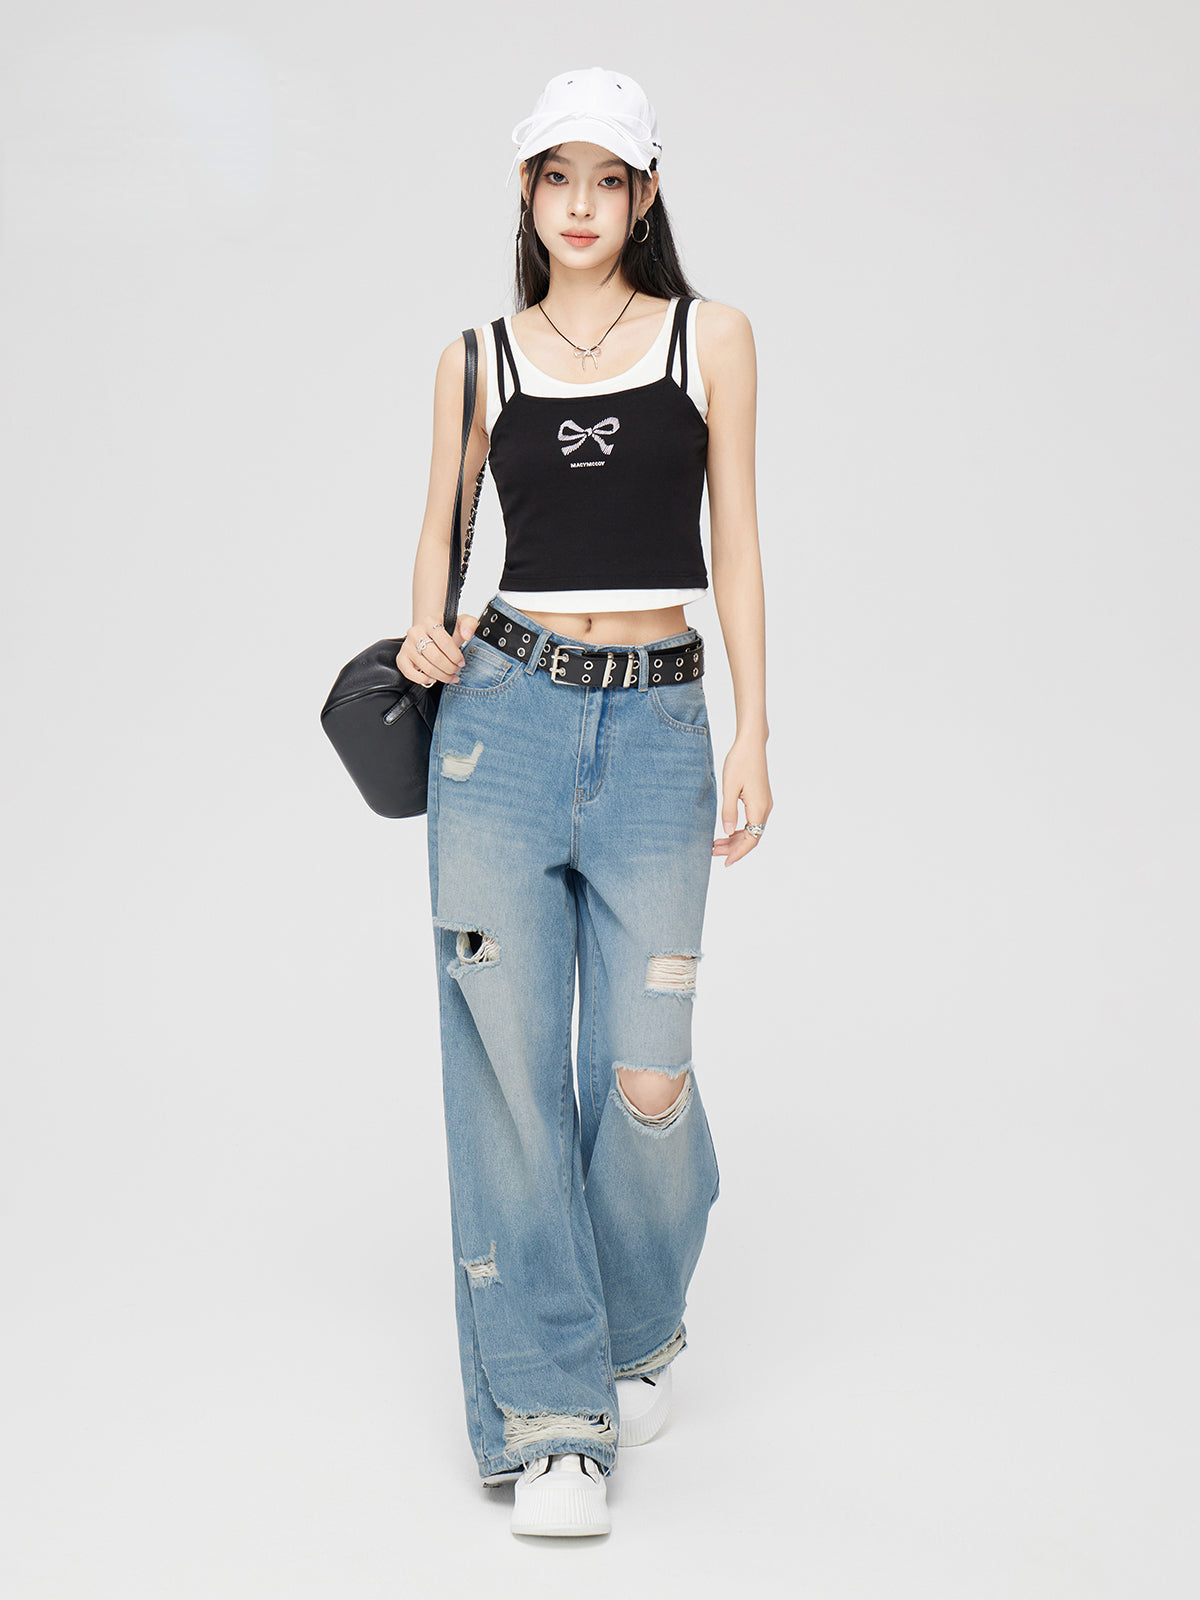 Blue Perforated Jeans Wide-leg Pants - CHINASQUAD